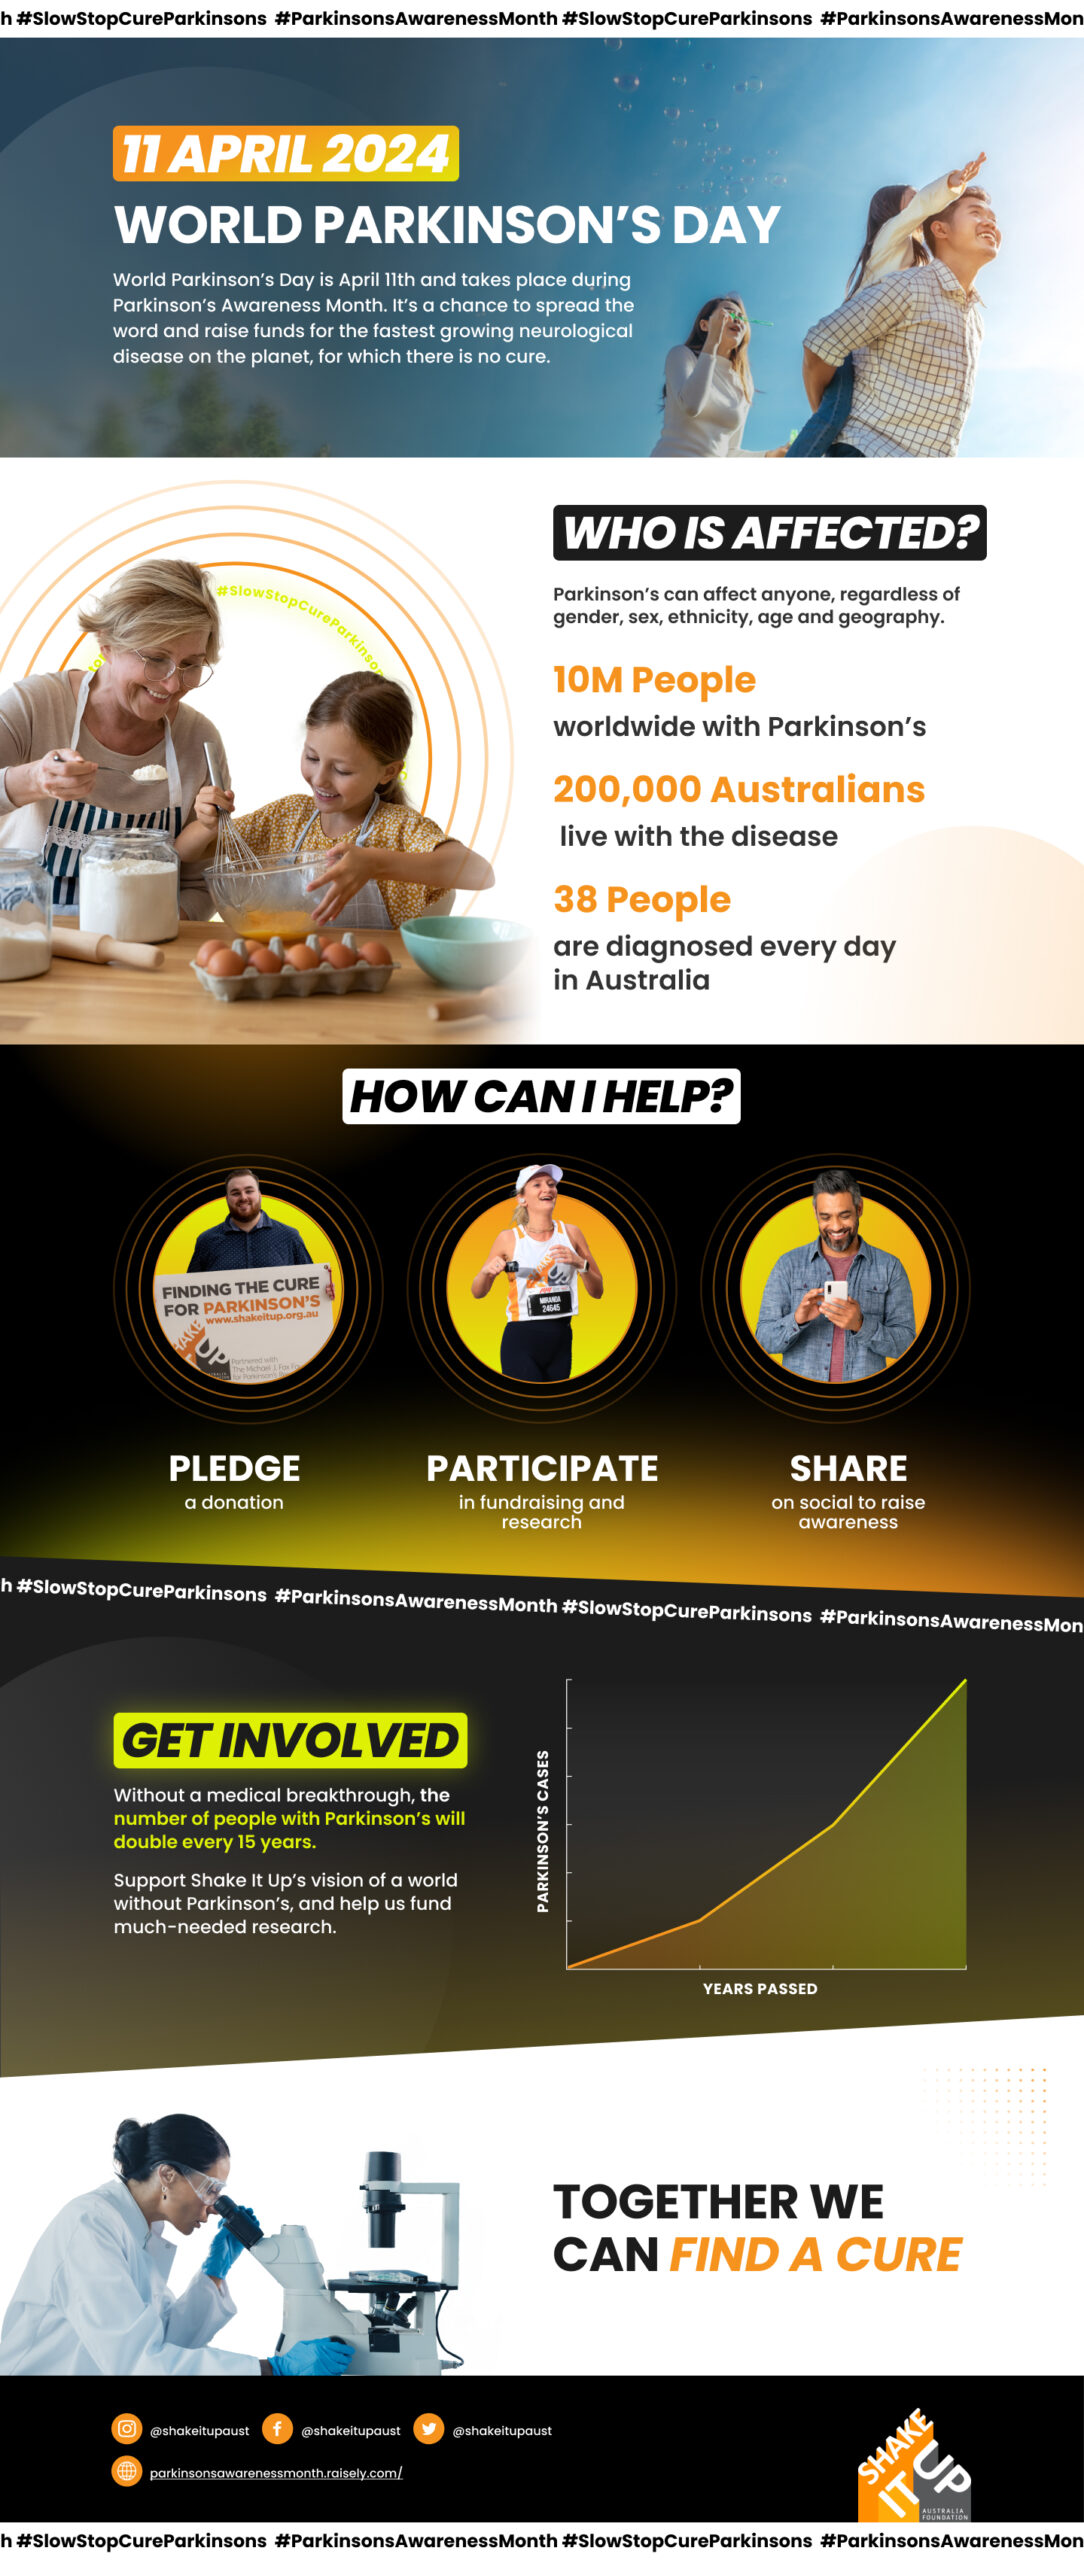 World Parkinson's Day Infographic 2024